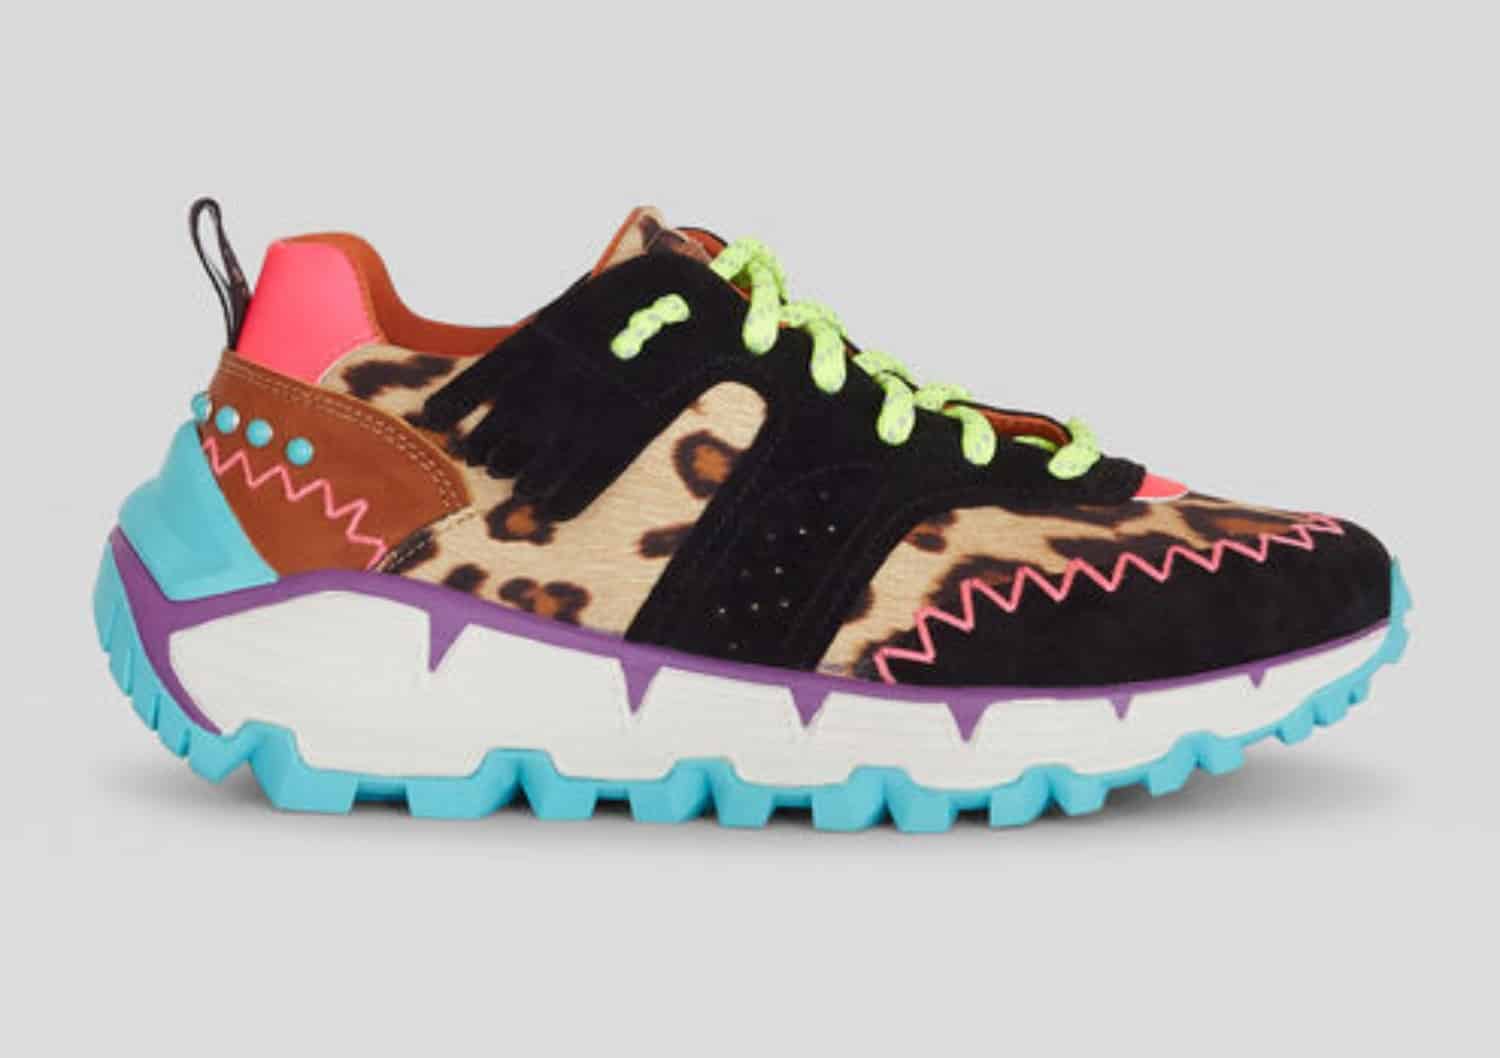 Editor's Pick: ETRO Earthbeat Sneaker - Daily Front Row